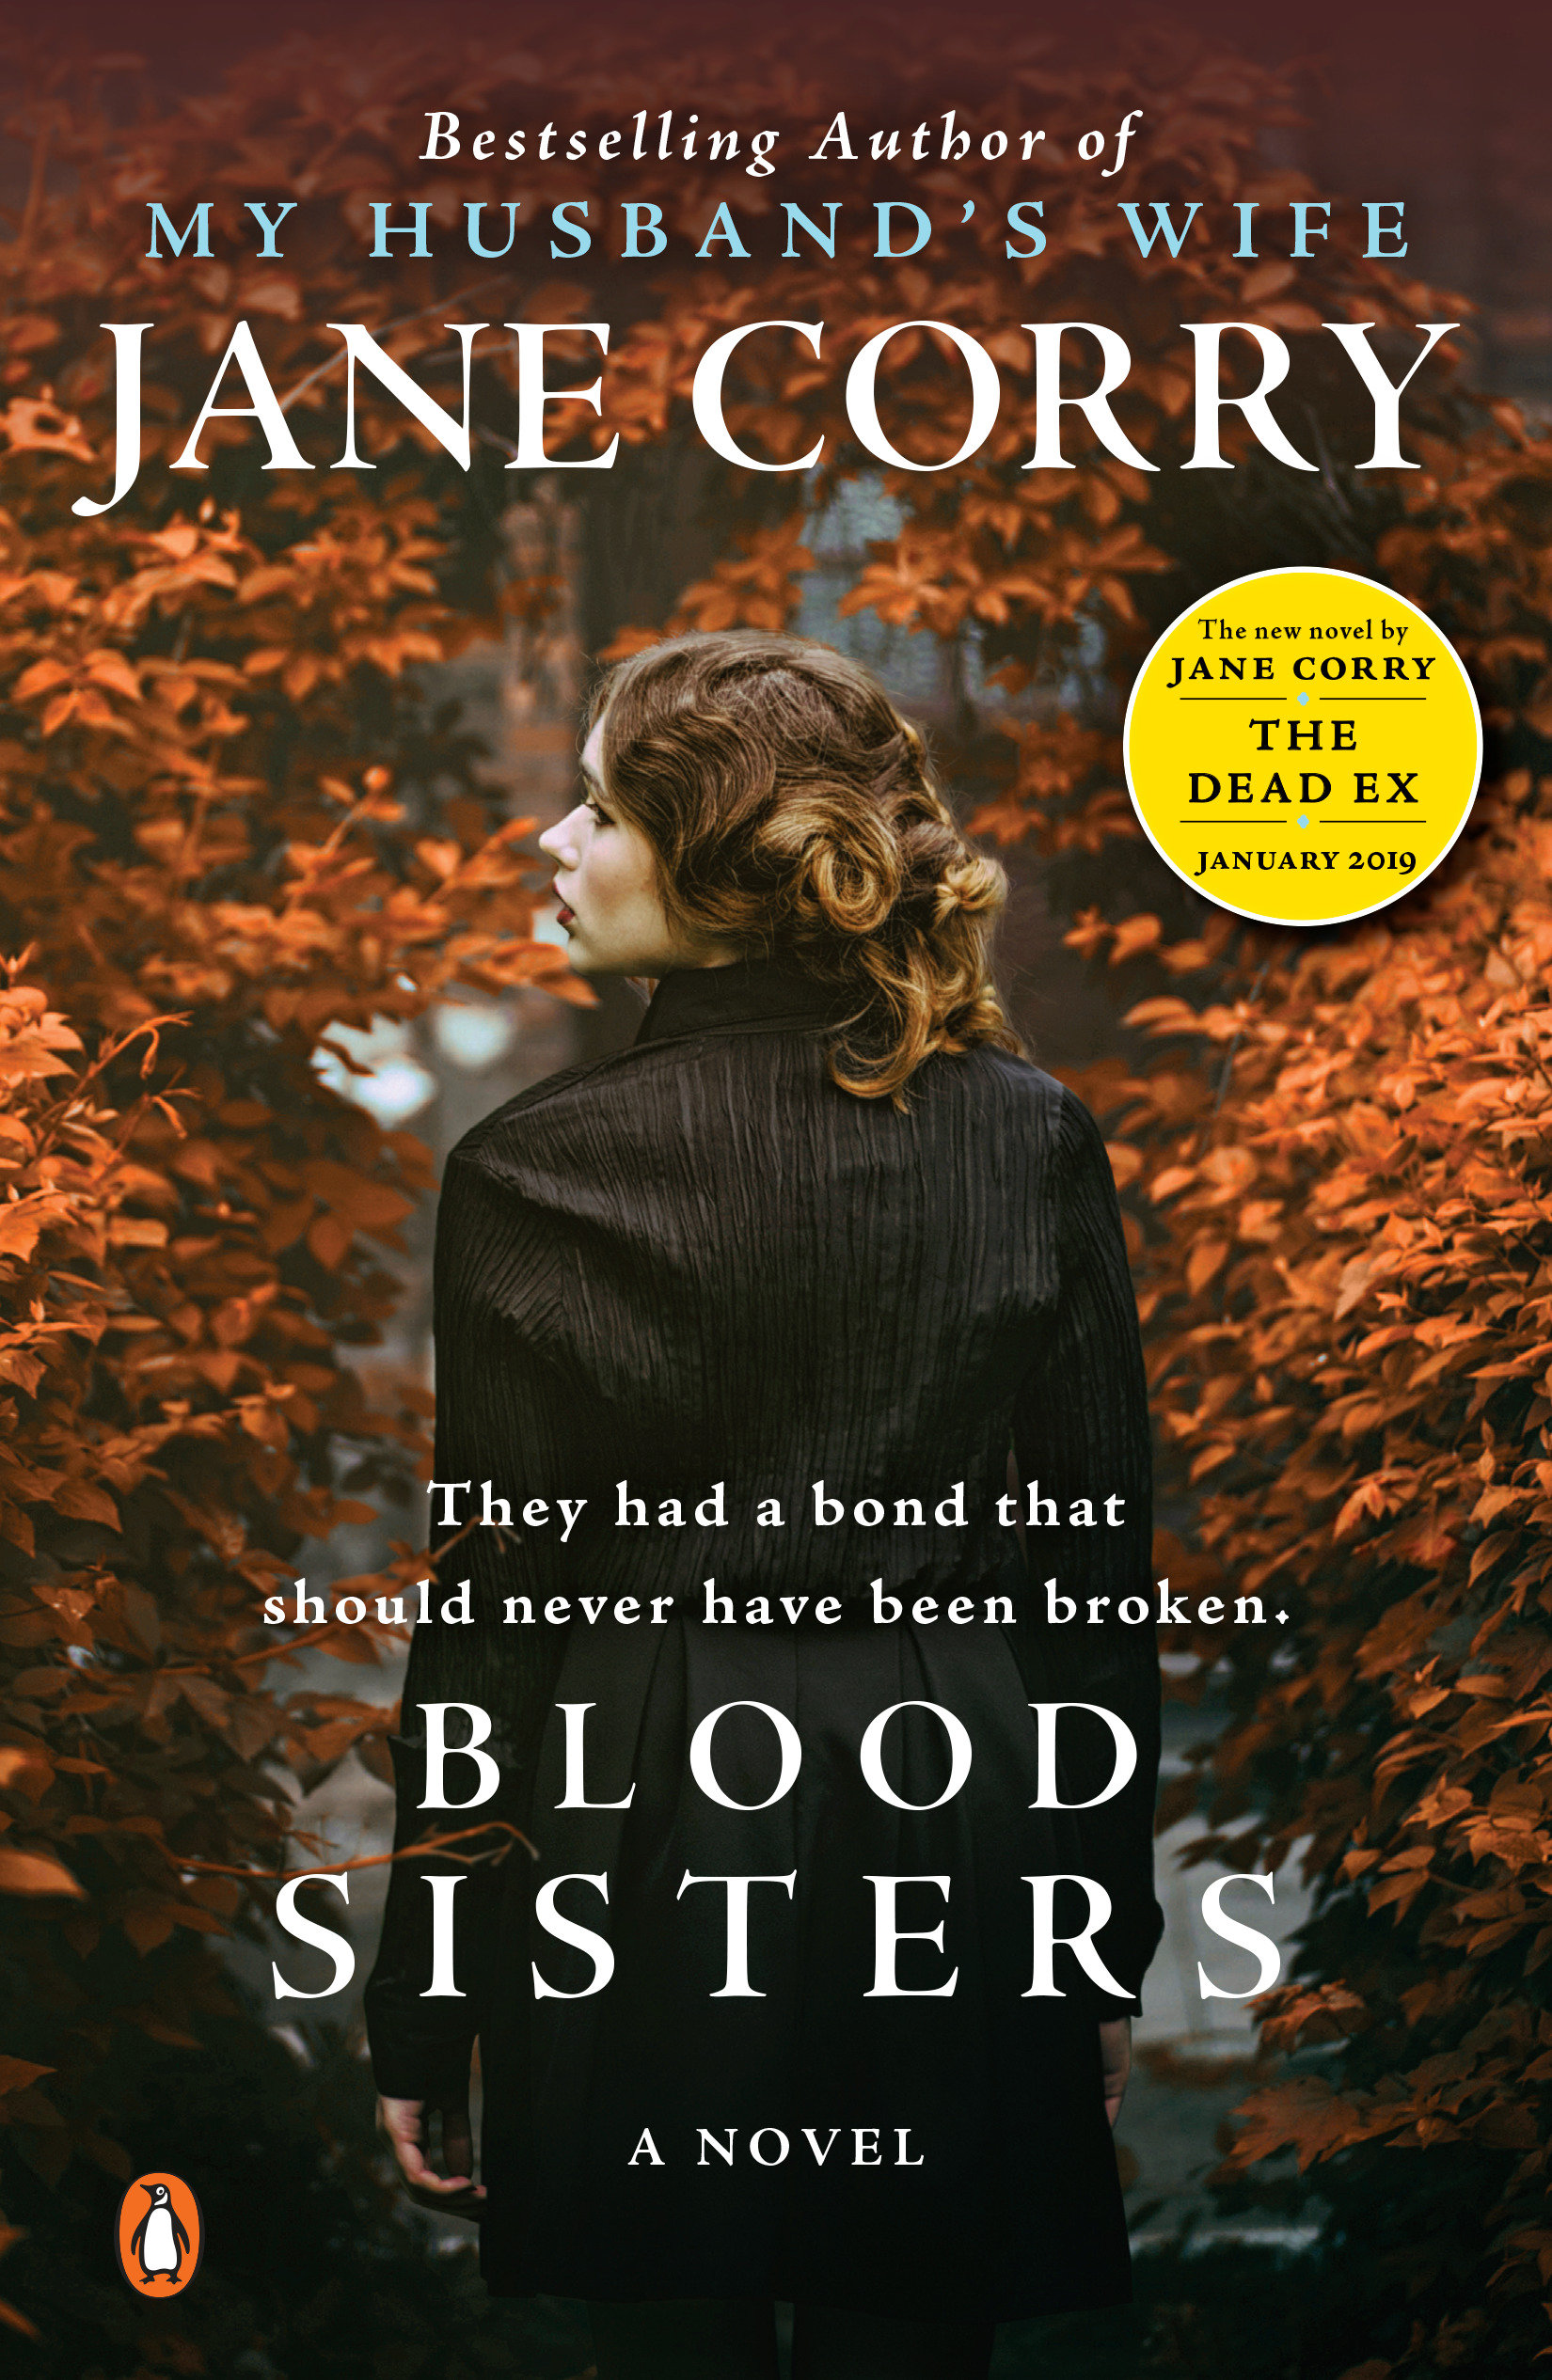 Blood sisters cover image